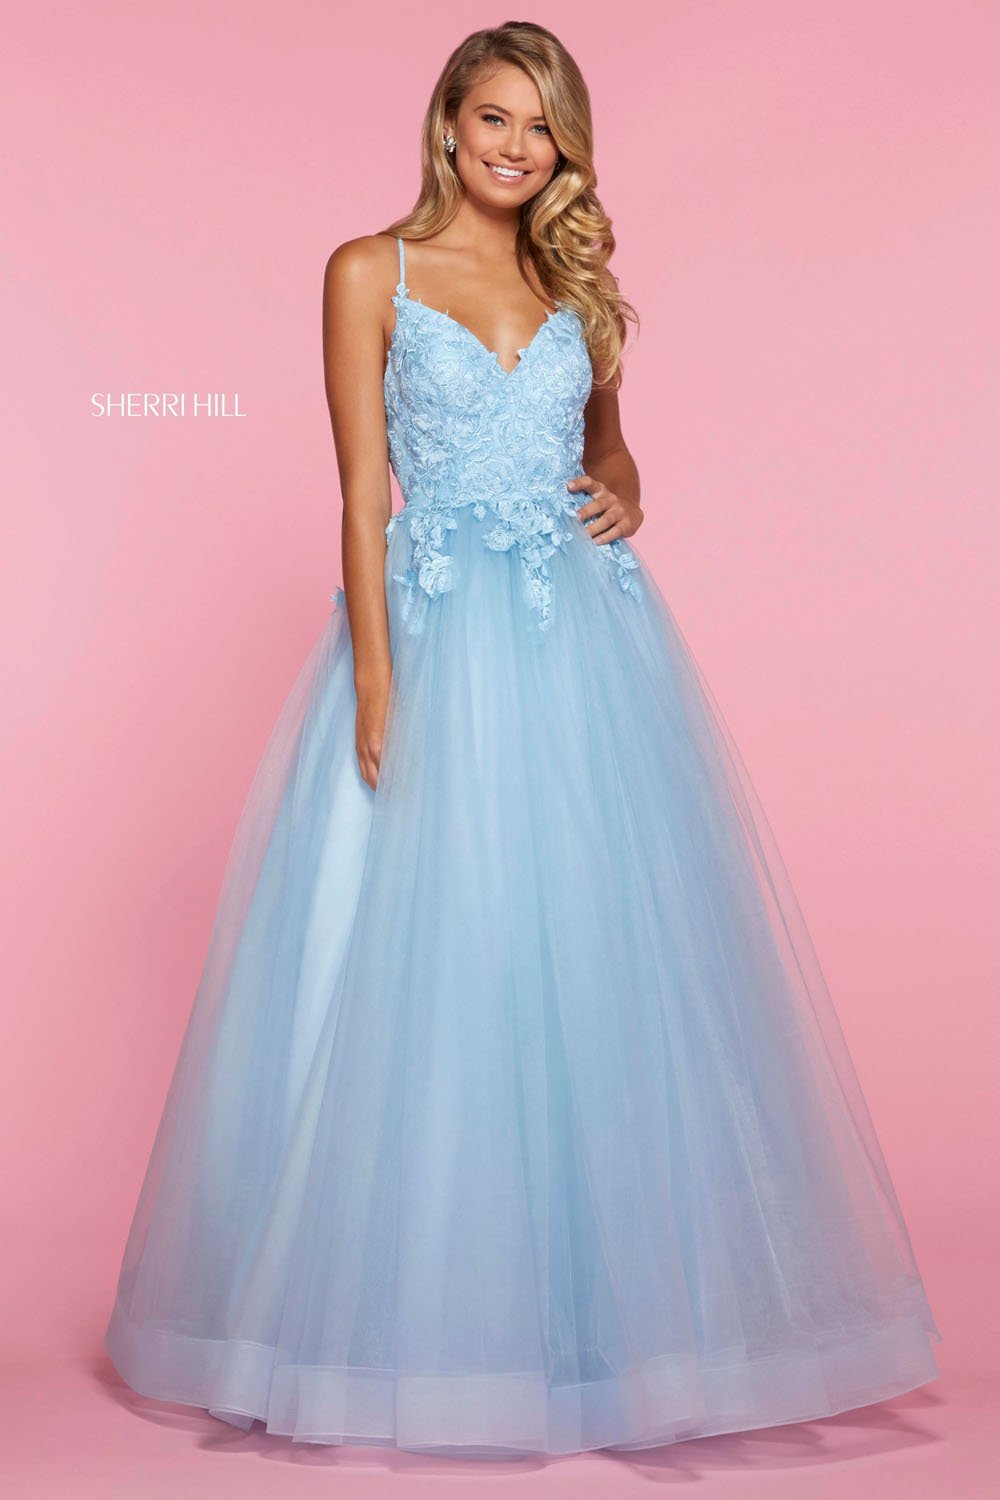 Sherri Hill 53411 dress images in these colors: Light Blue, Ivory.